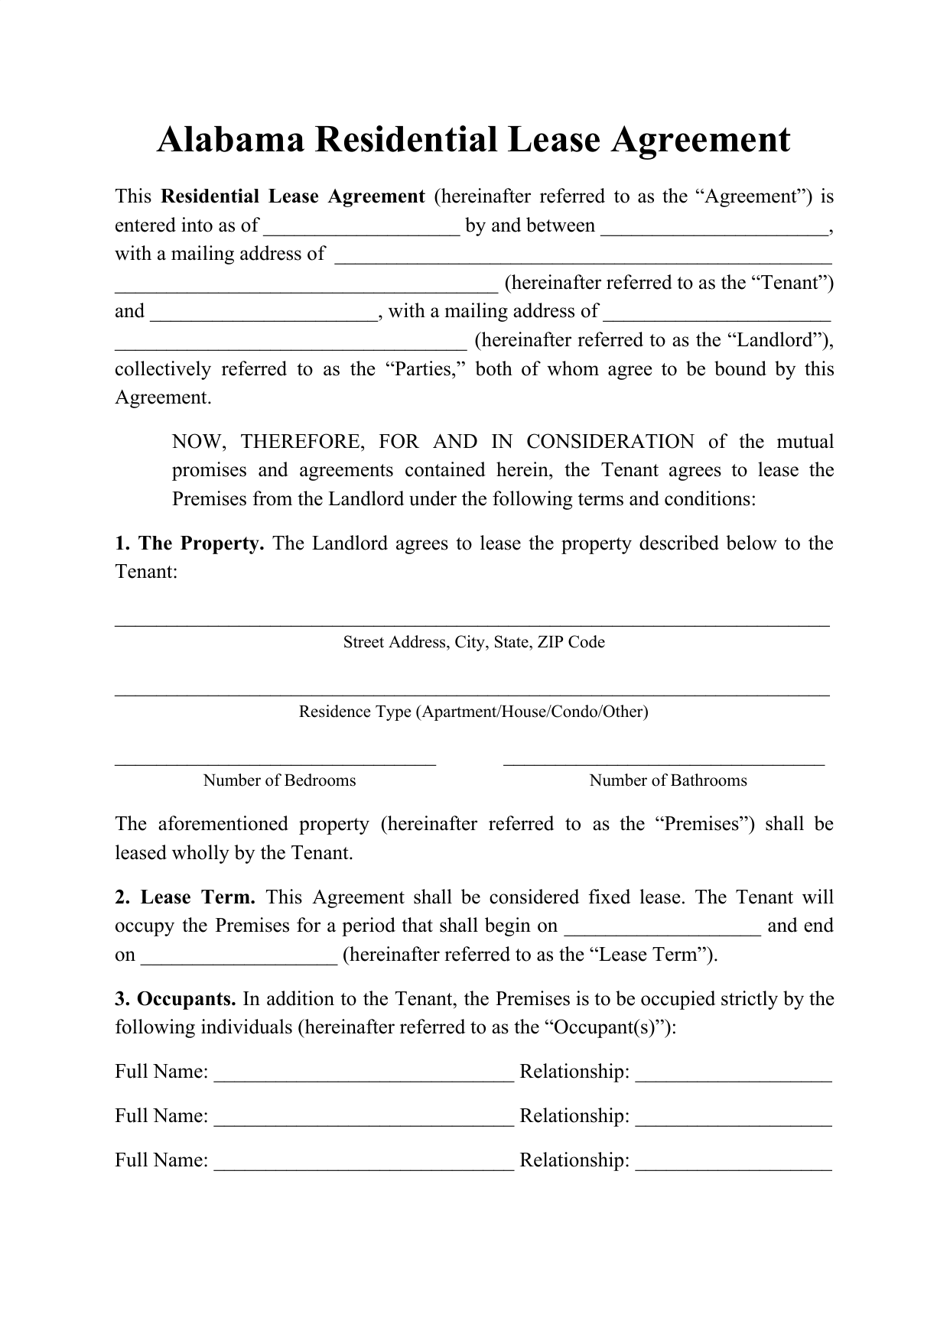 Alabama Residential Lease Agreement Template Fill Out Sign Online